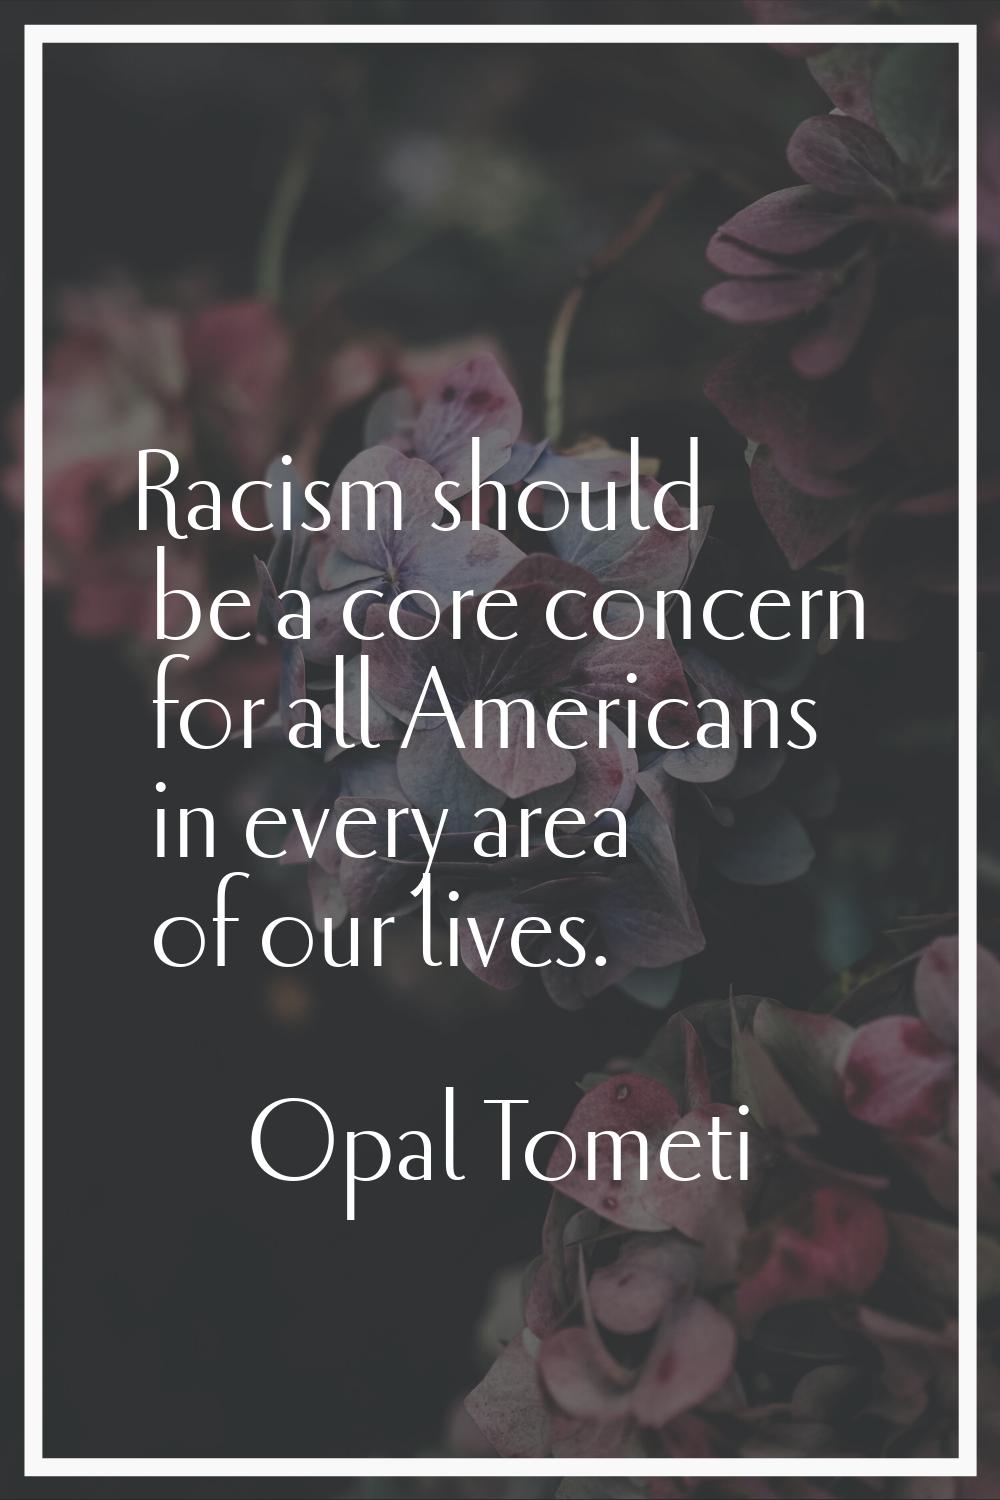 Racism should be a core concern for all Americans in every area of our lives.